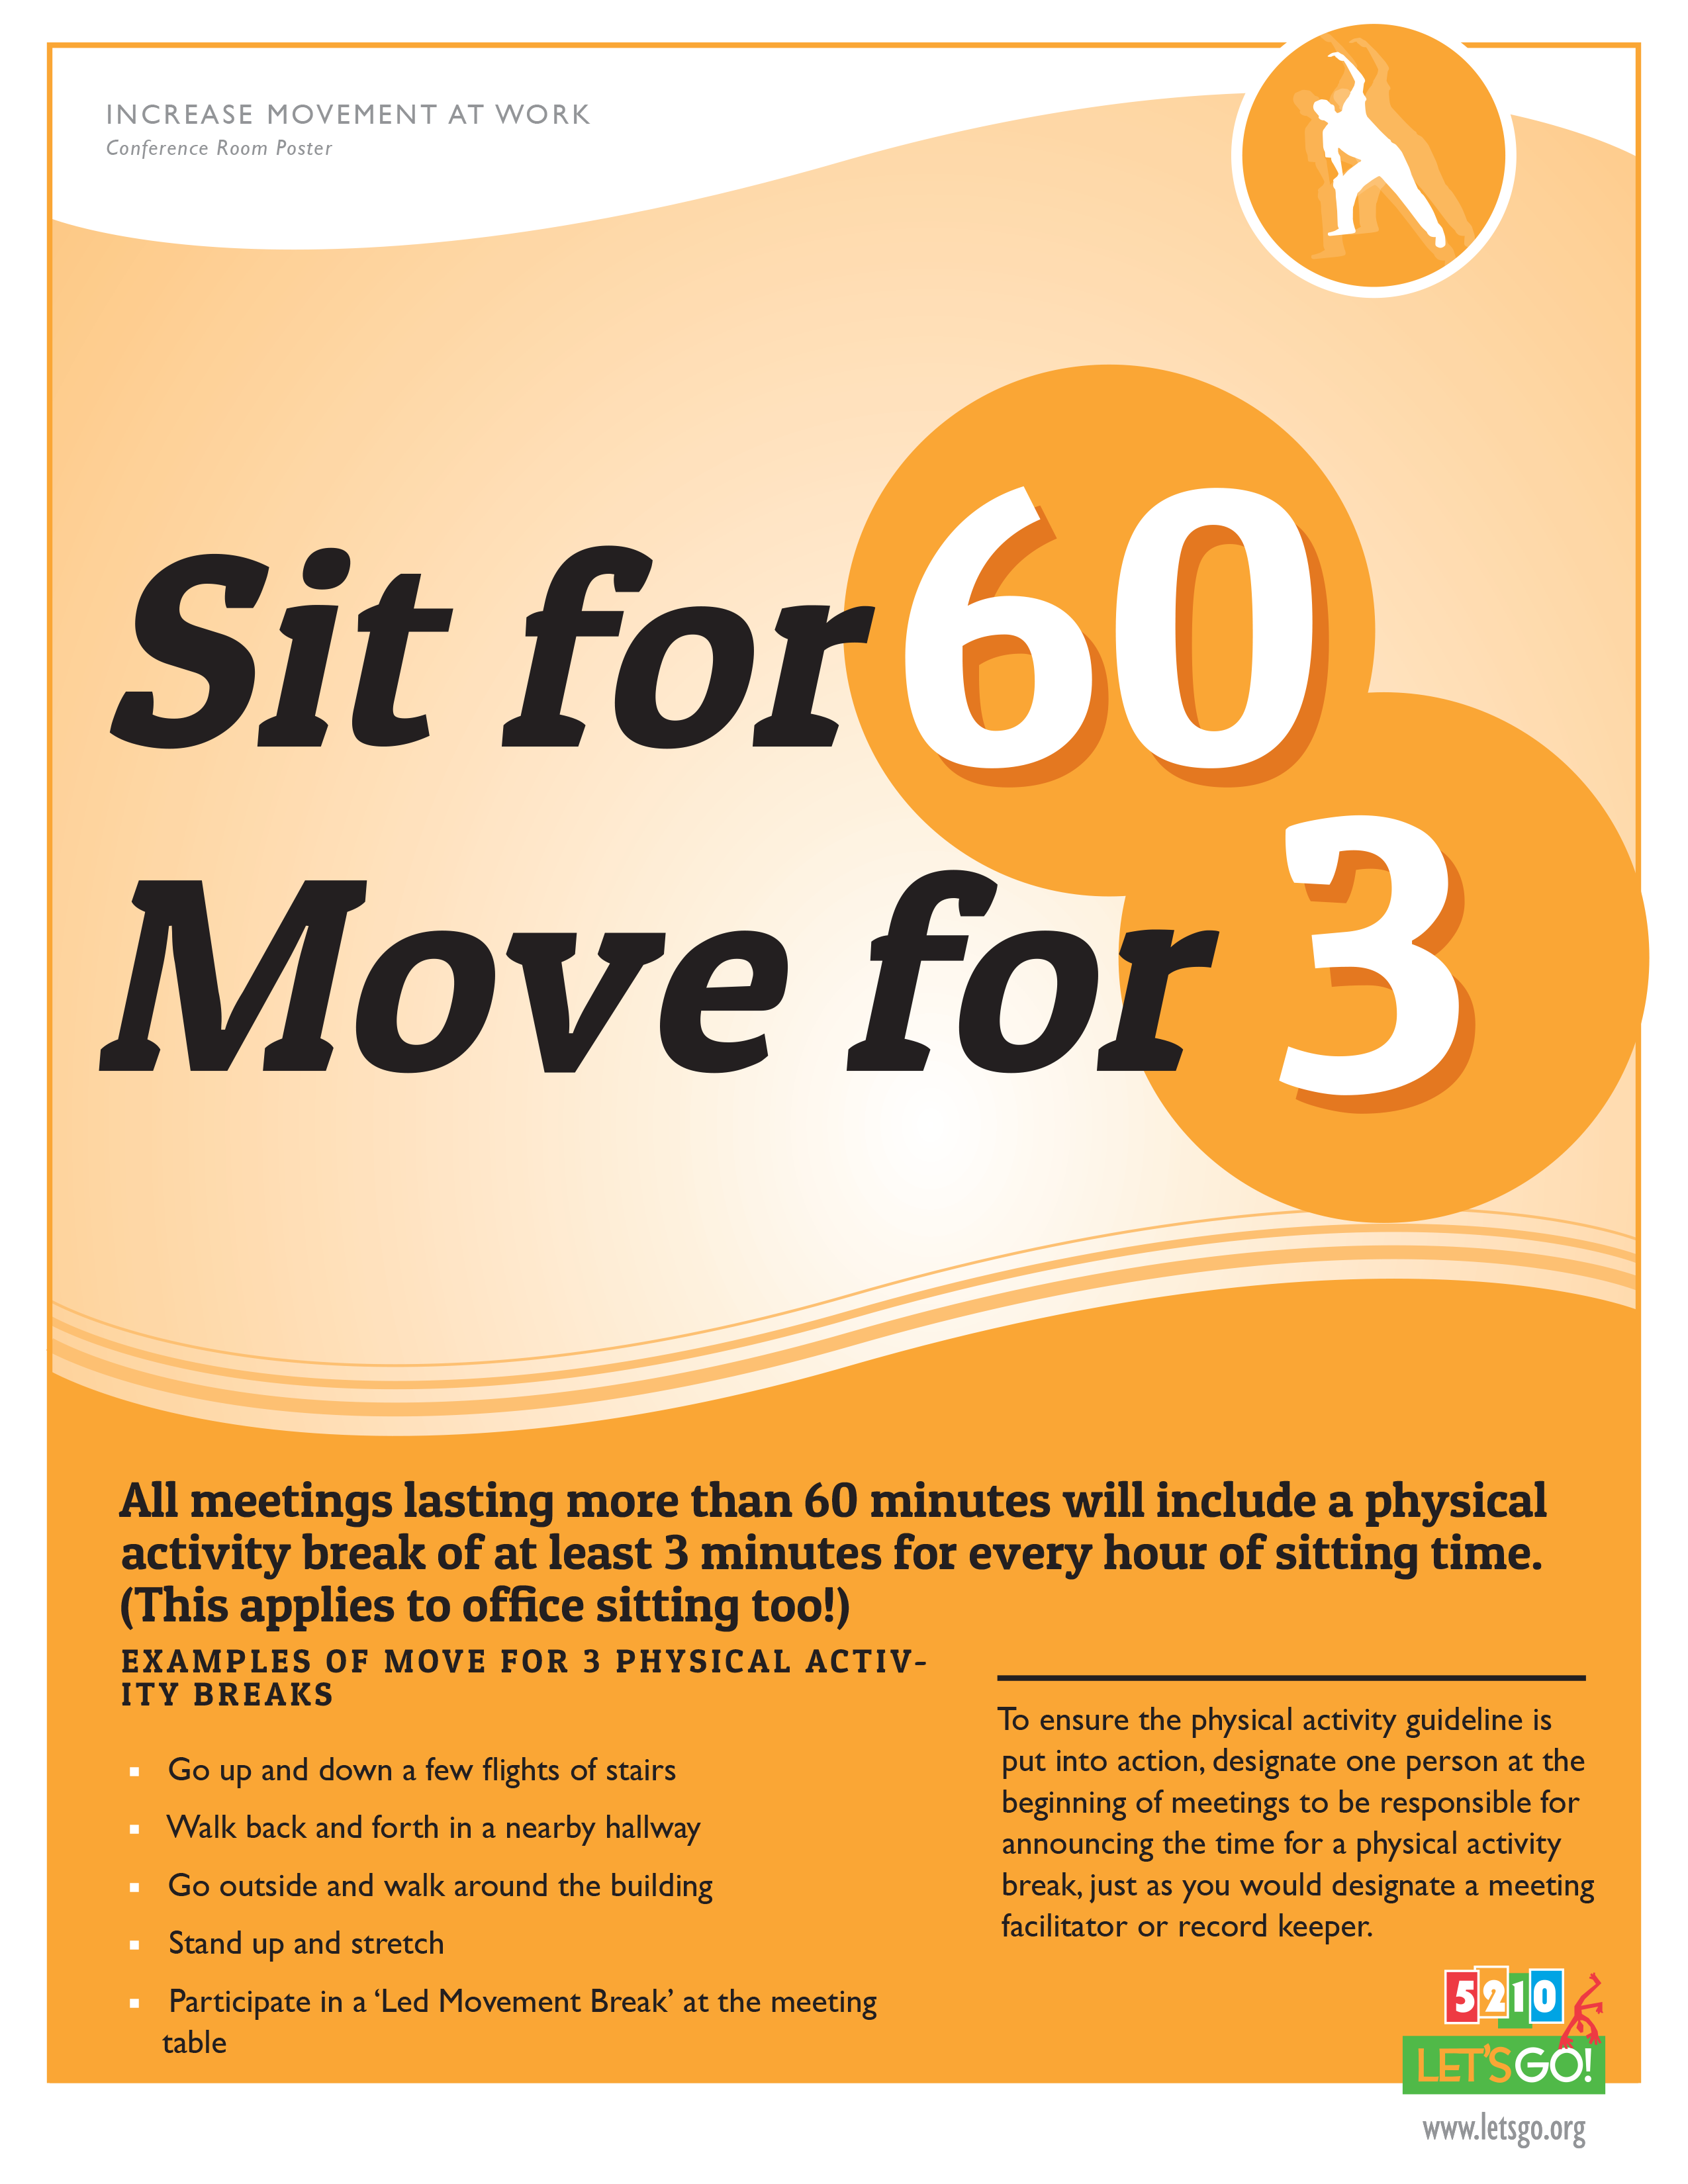 Sit for 60 Move for 3